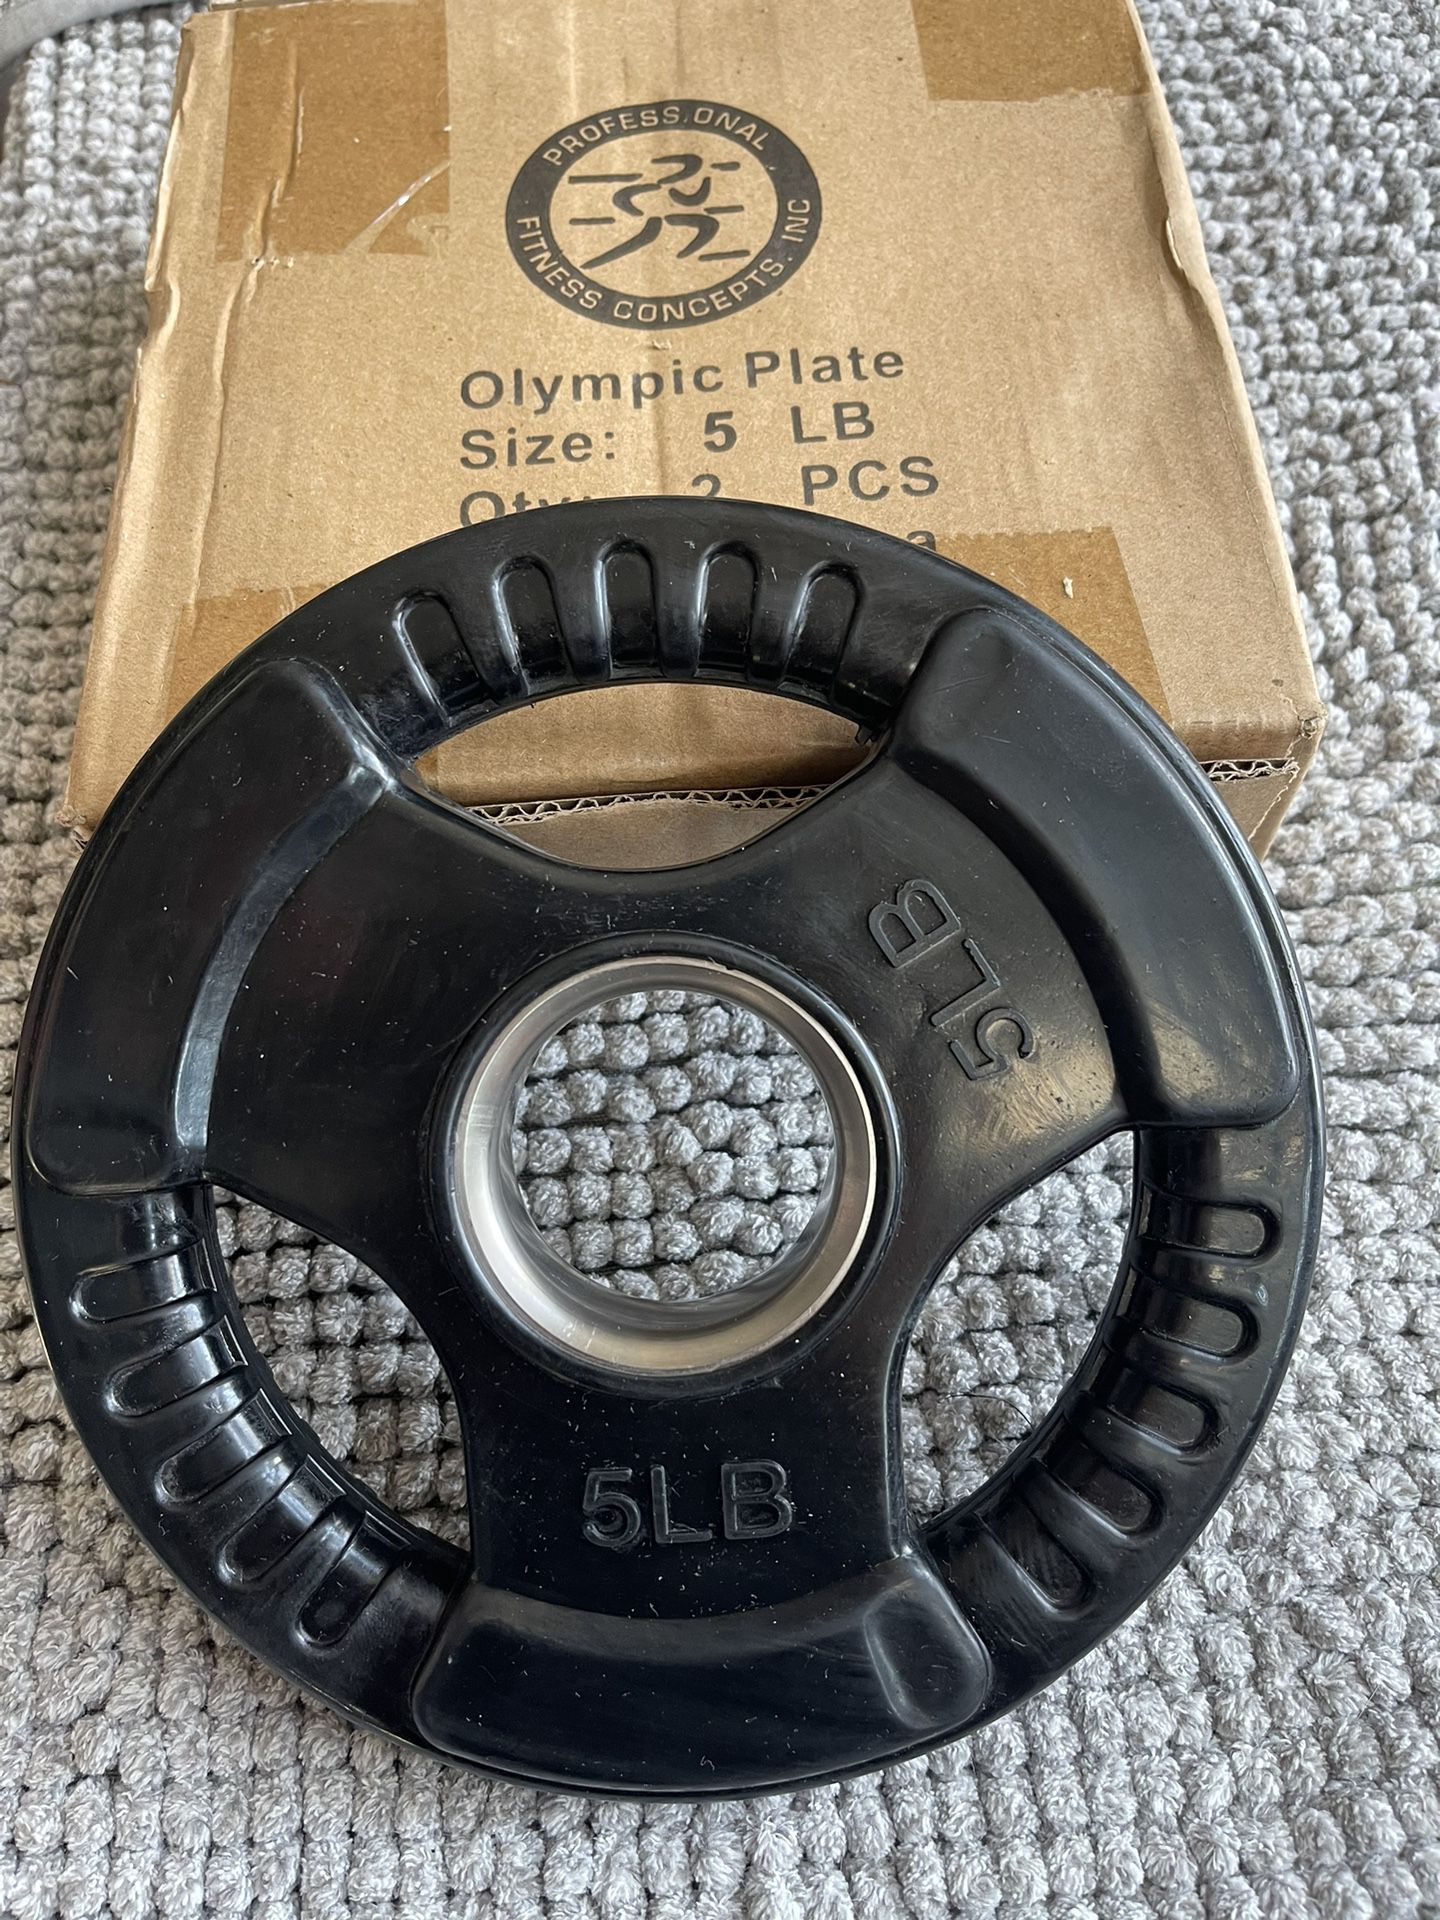 35 Pound Olympic rubber Weights Brand New 